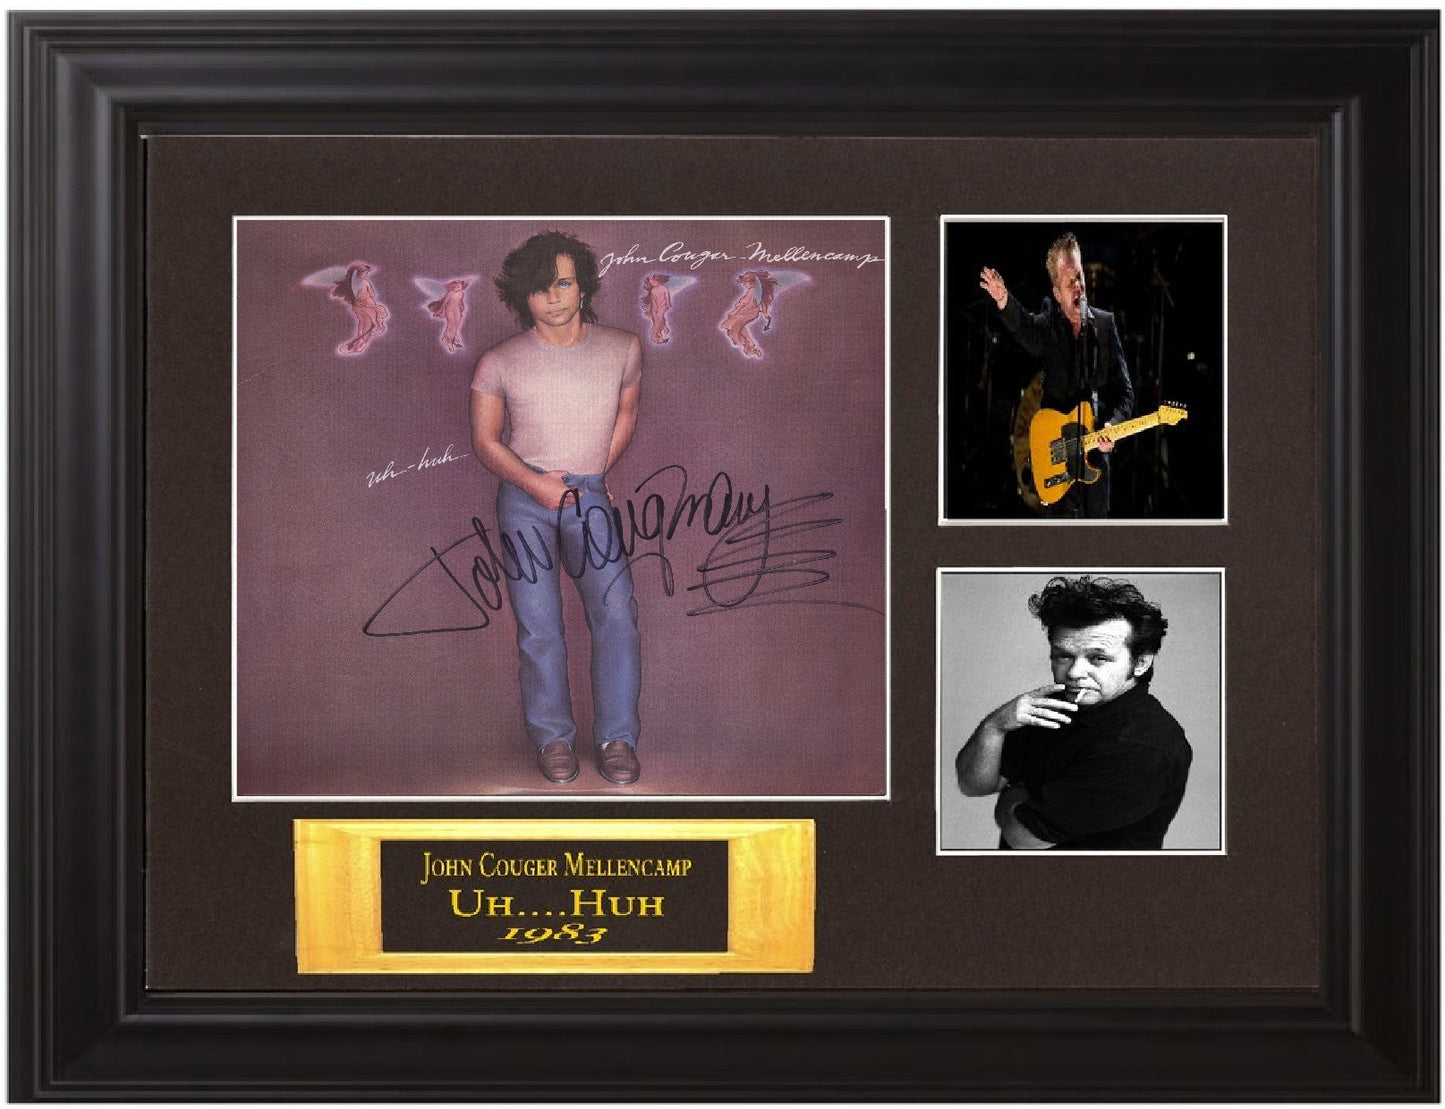 John Cougar Mellencamp Band Signed Uh Huh Album - Zion Graphic Collectibles